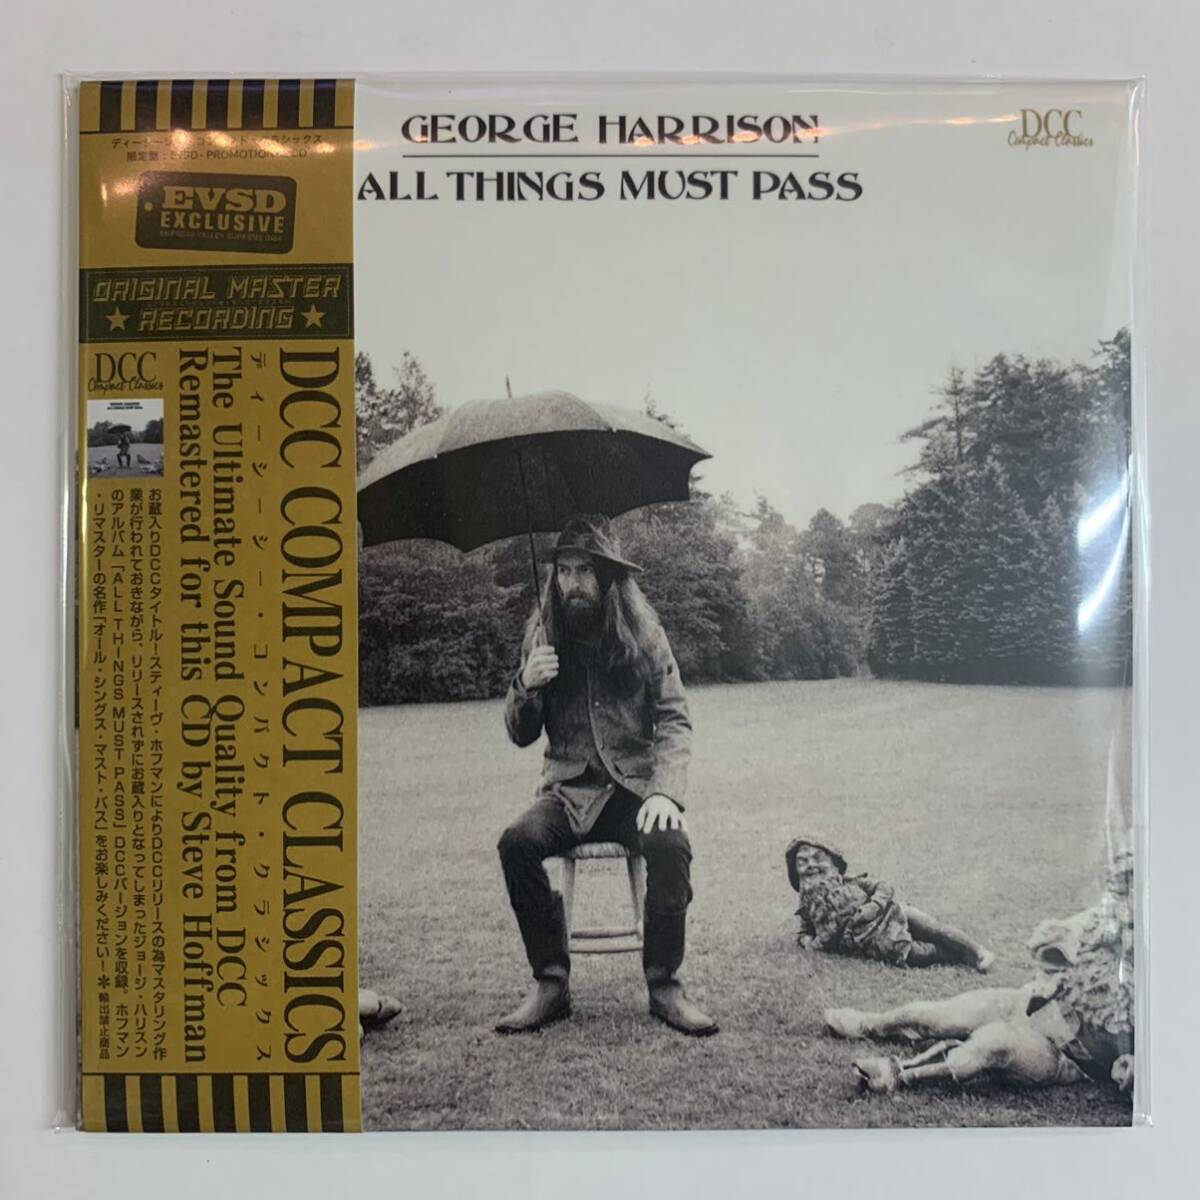 GEORGE HARRISON / ALL THINGS MUST PASS DCC COMPACT CLASSICS Remastered by Steve Hoffman (CD) 「帯付き紙ジャケット仕様限定盤」